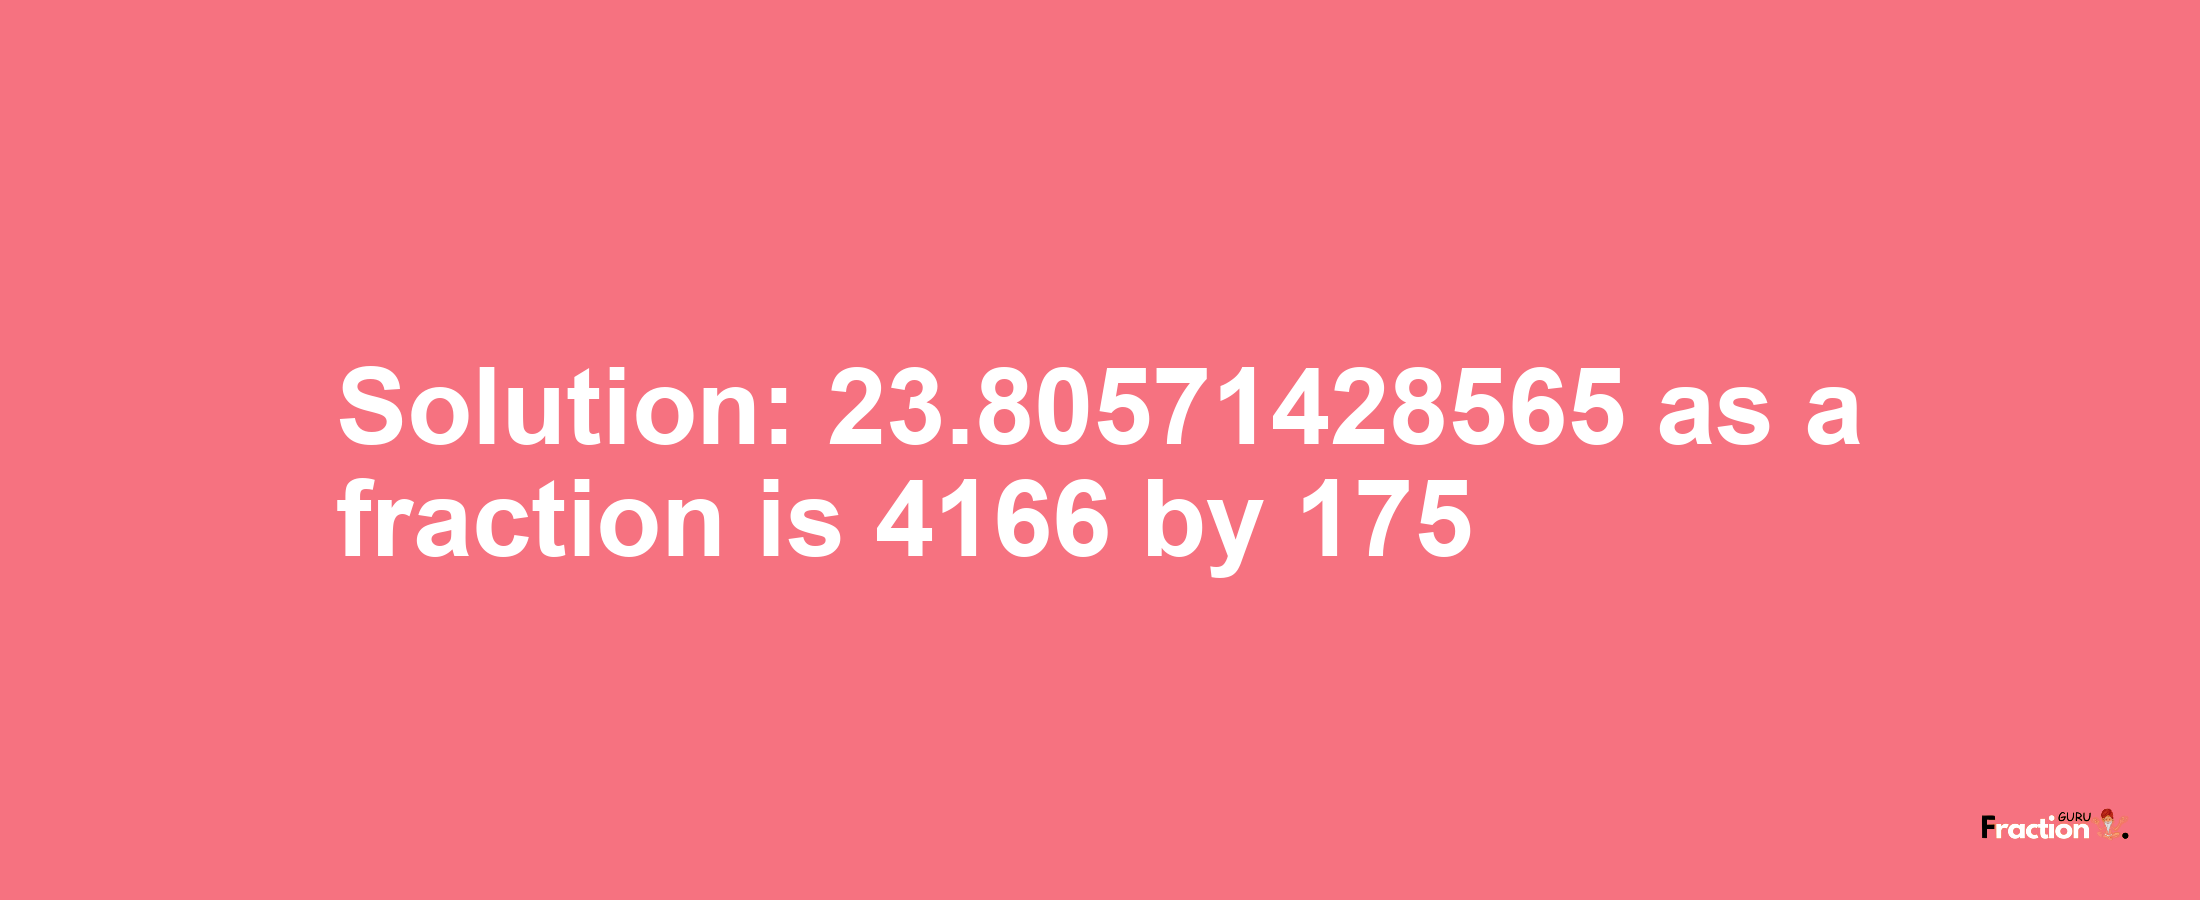 Solution:23.80571428565 as a fraction is 4166/175